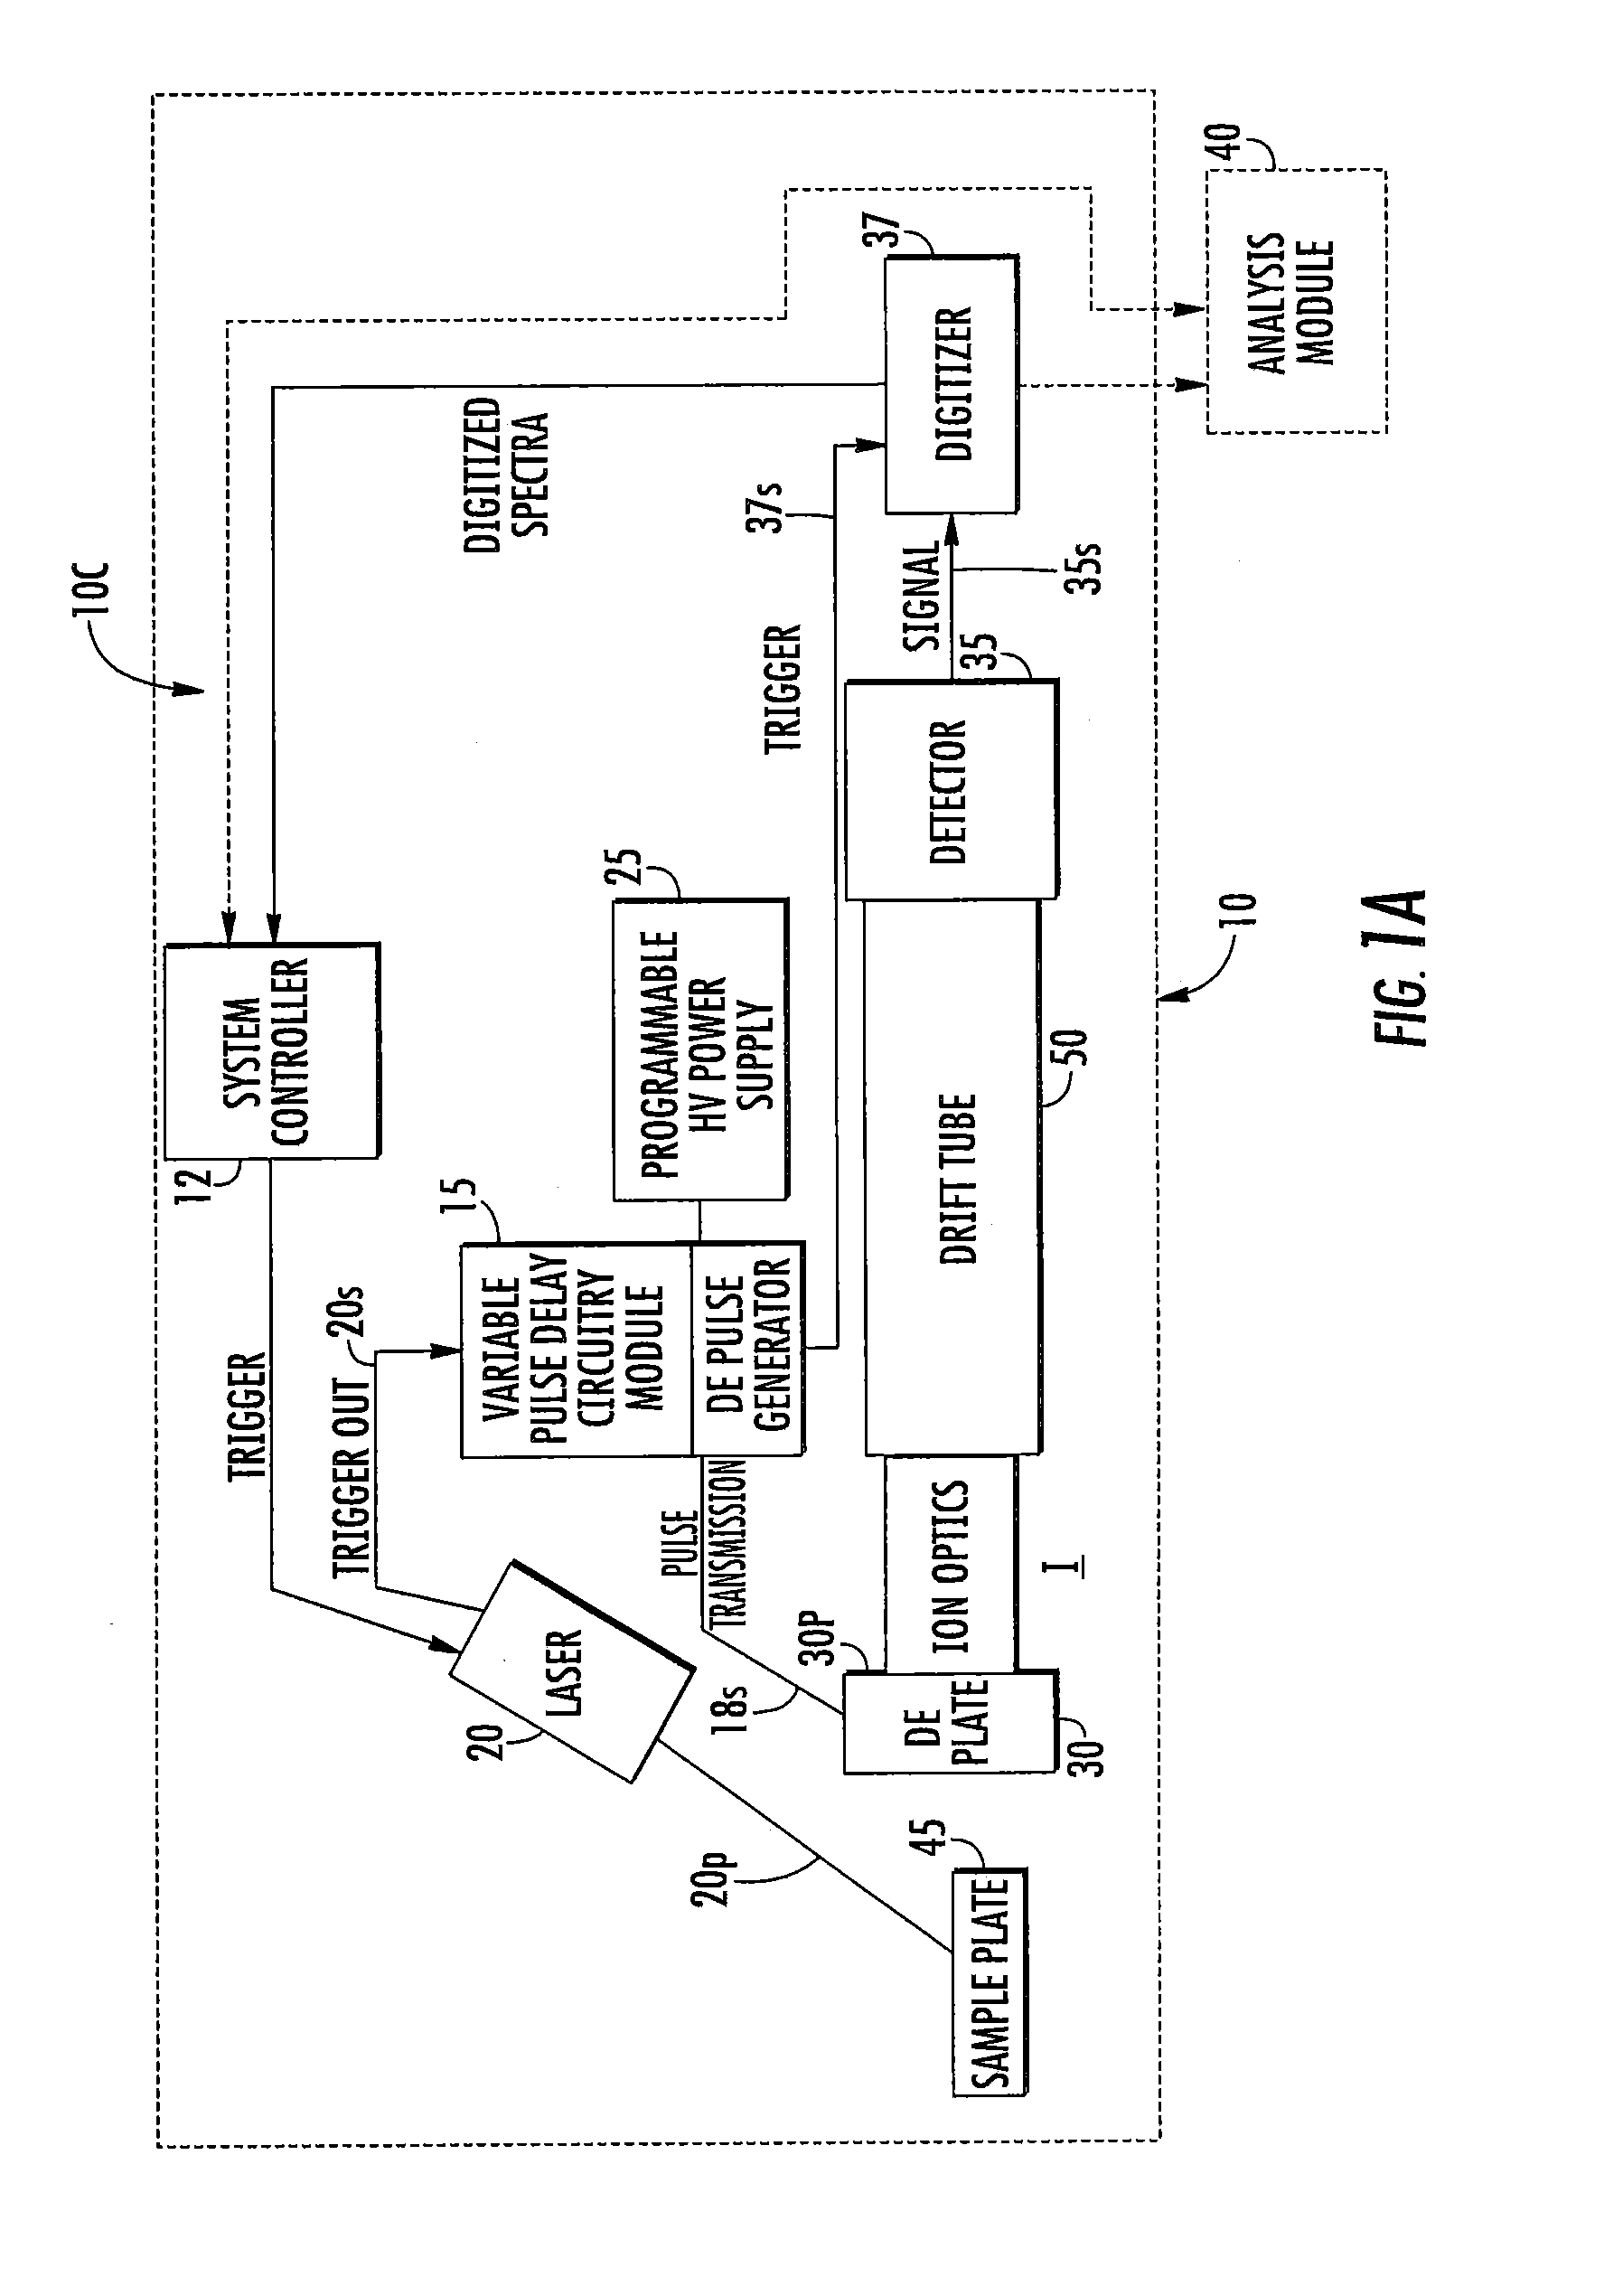 Maldi-tof mass spectrometers with delay time variations and related methods